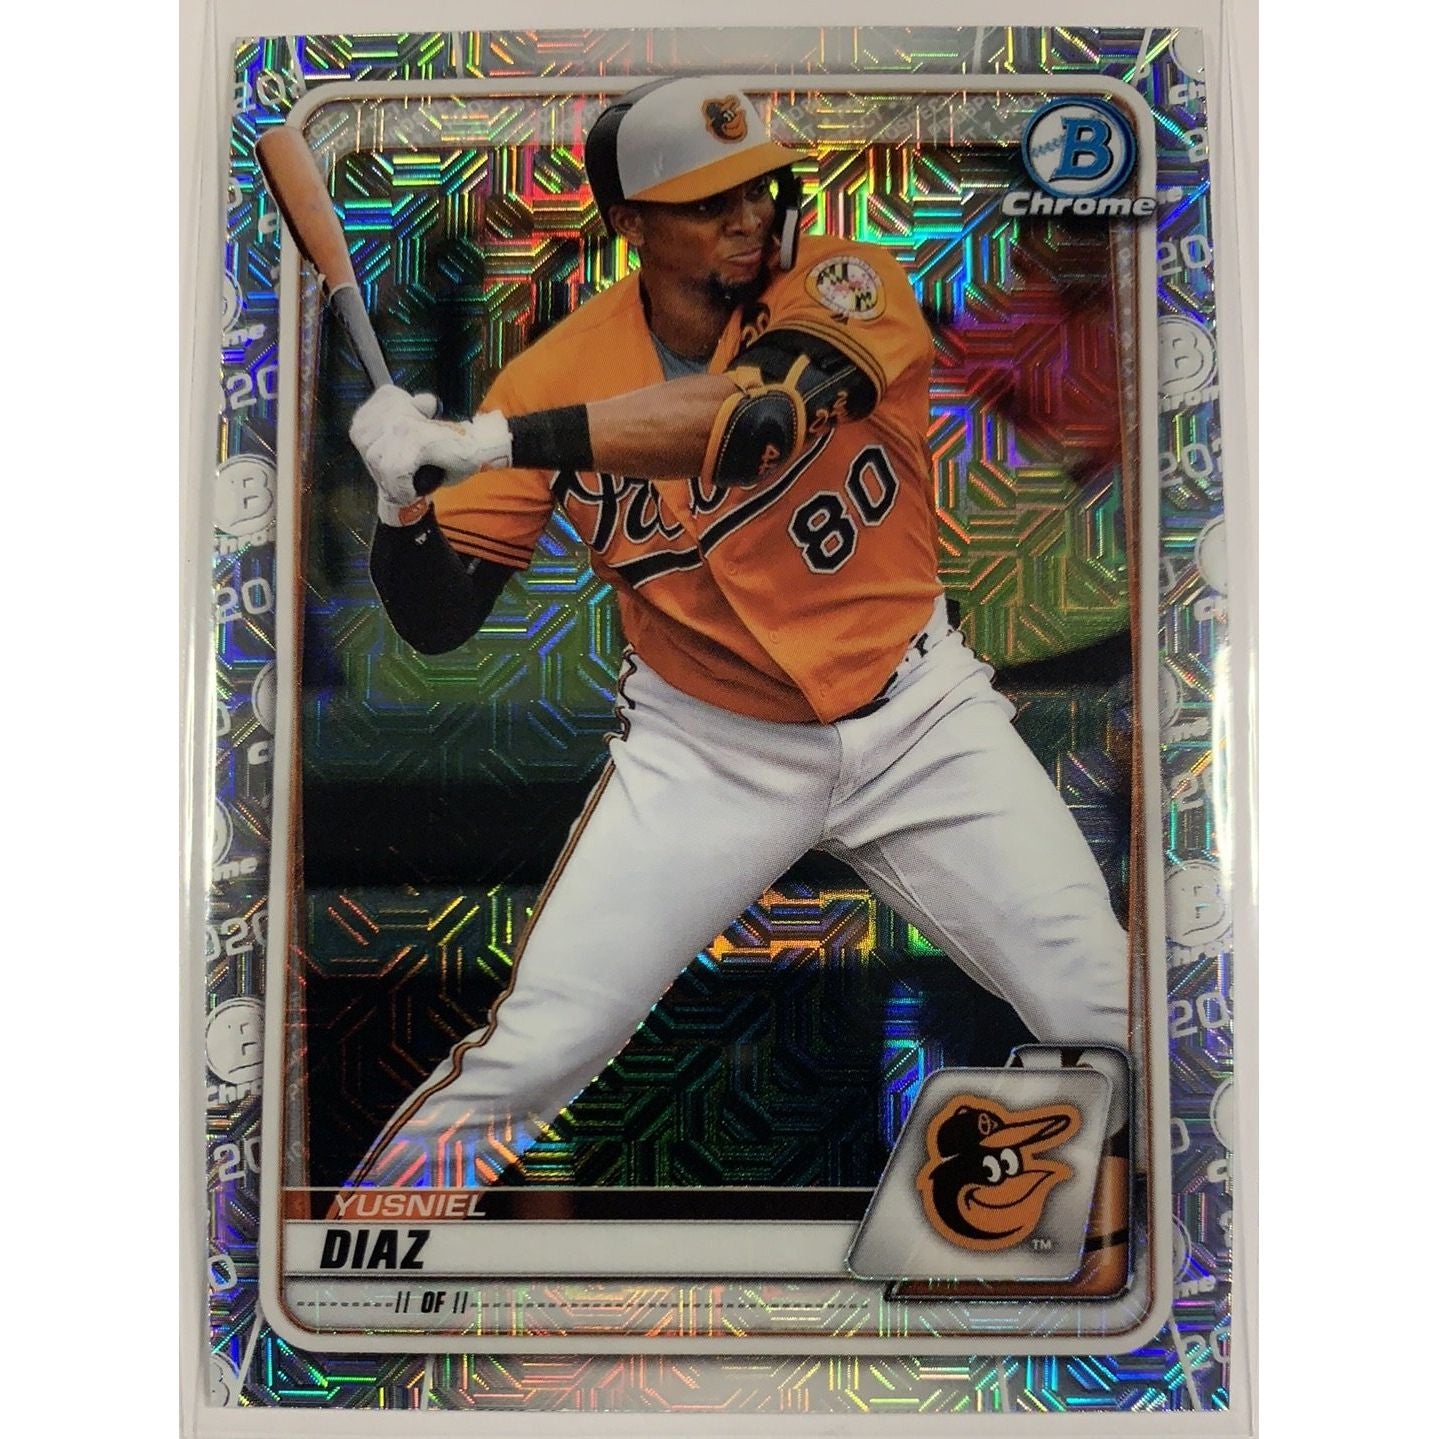  2020 Bowman Chrome Yusniel Diaz Mojo Refractor  Local Legends Cards & Collectibles